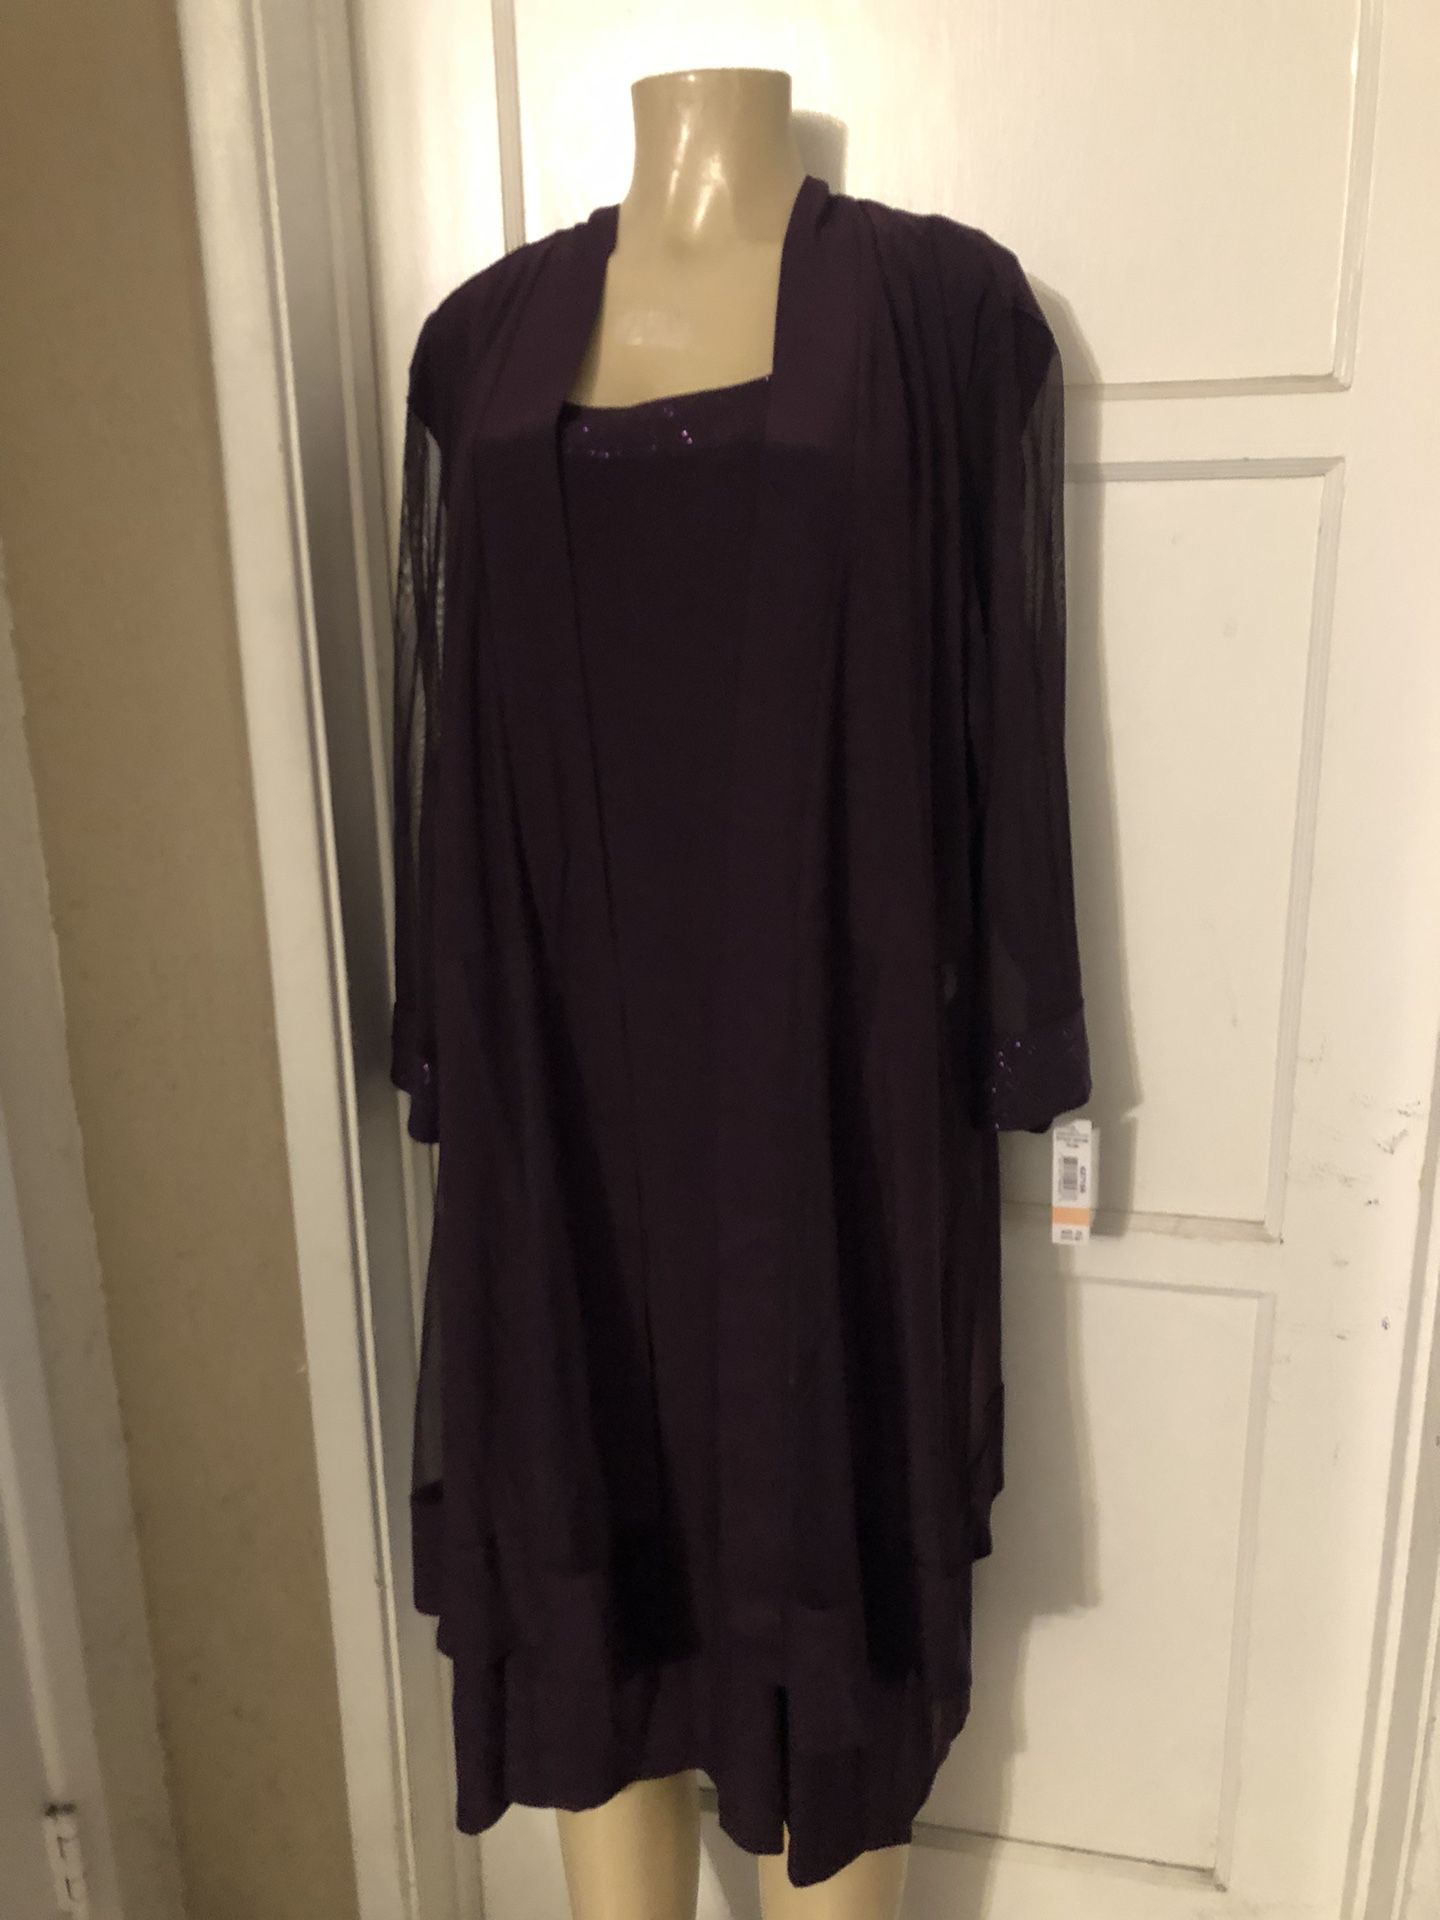 PLUS-SIZE FORMAL DRESSES SIZES XXL 16 NEW WITH TAG